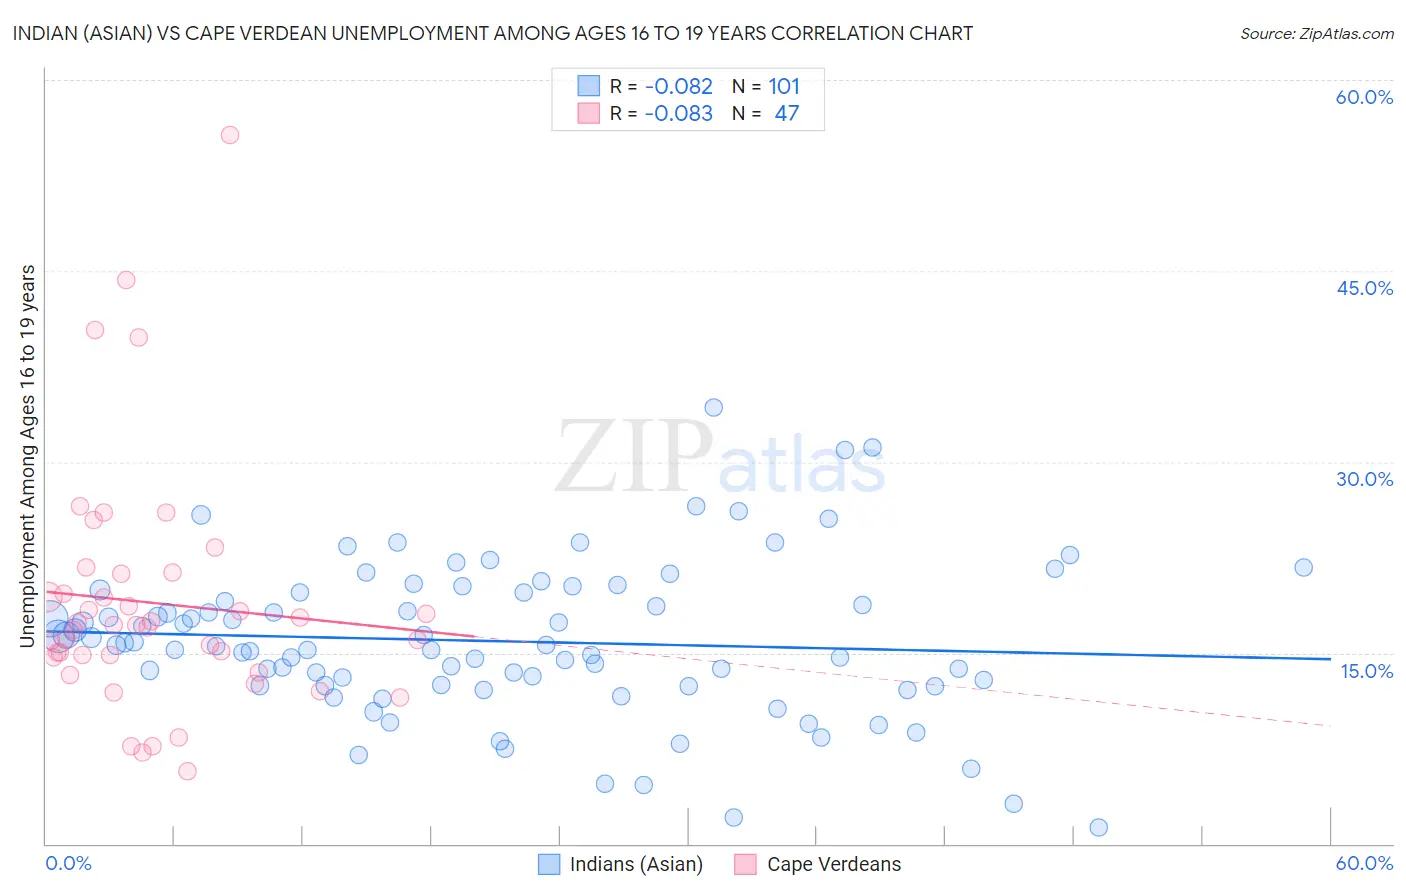 Indian (Asian) vs Cape Verdean Unemployment Among Ages 16 to 19 years